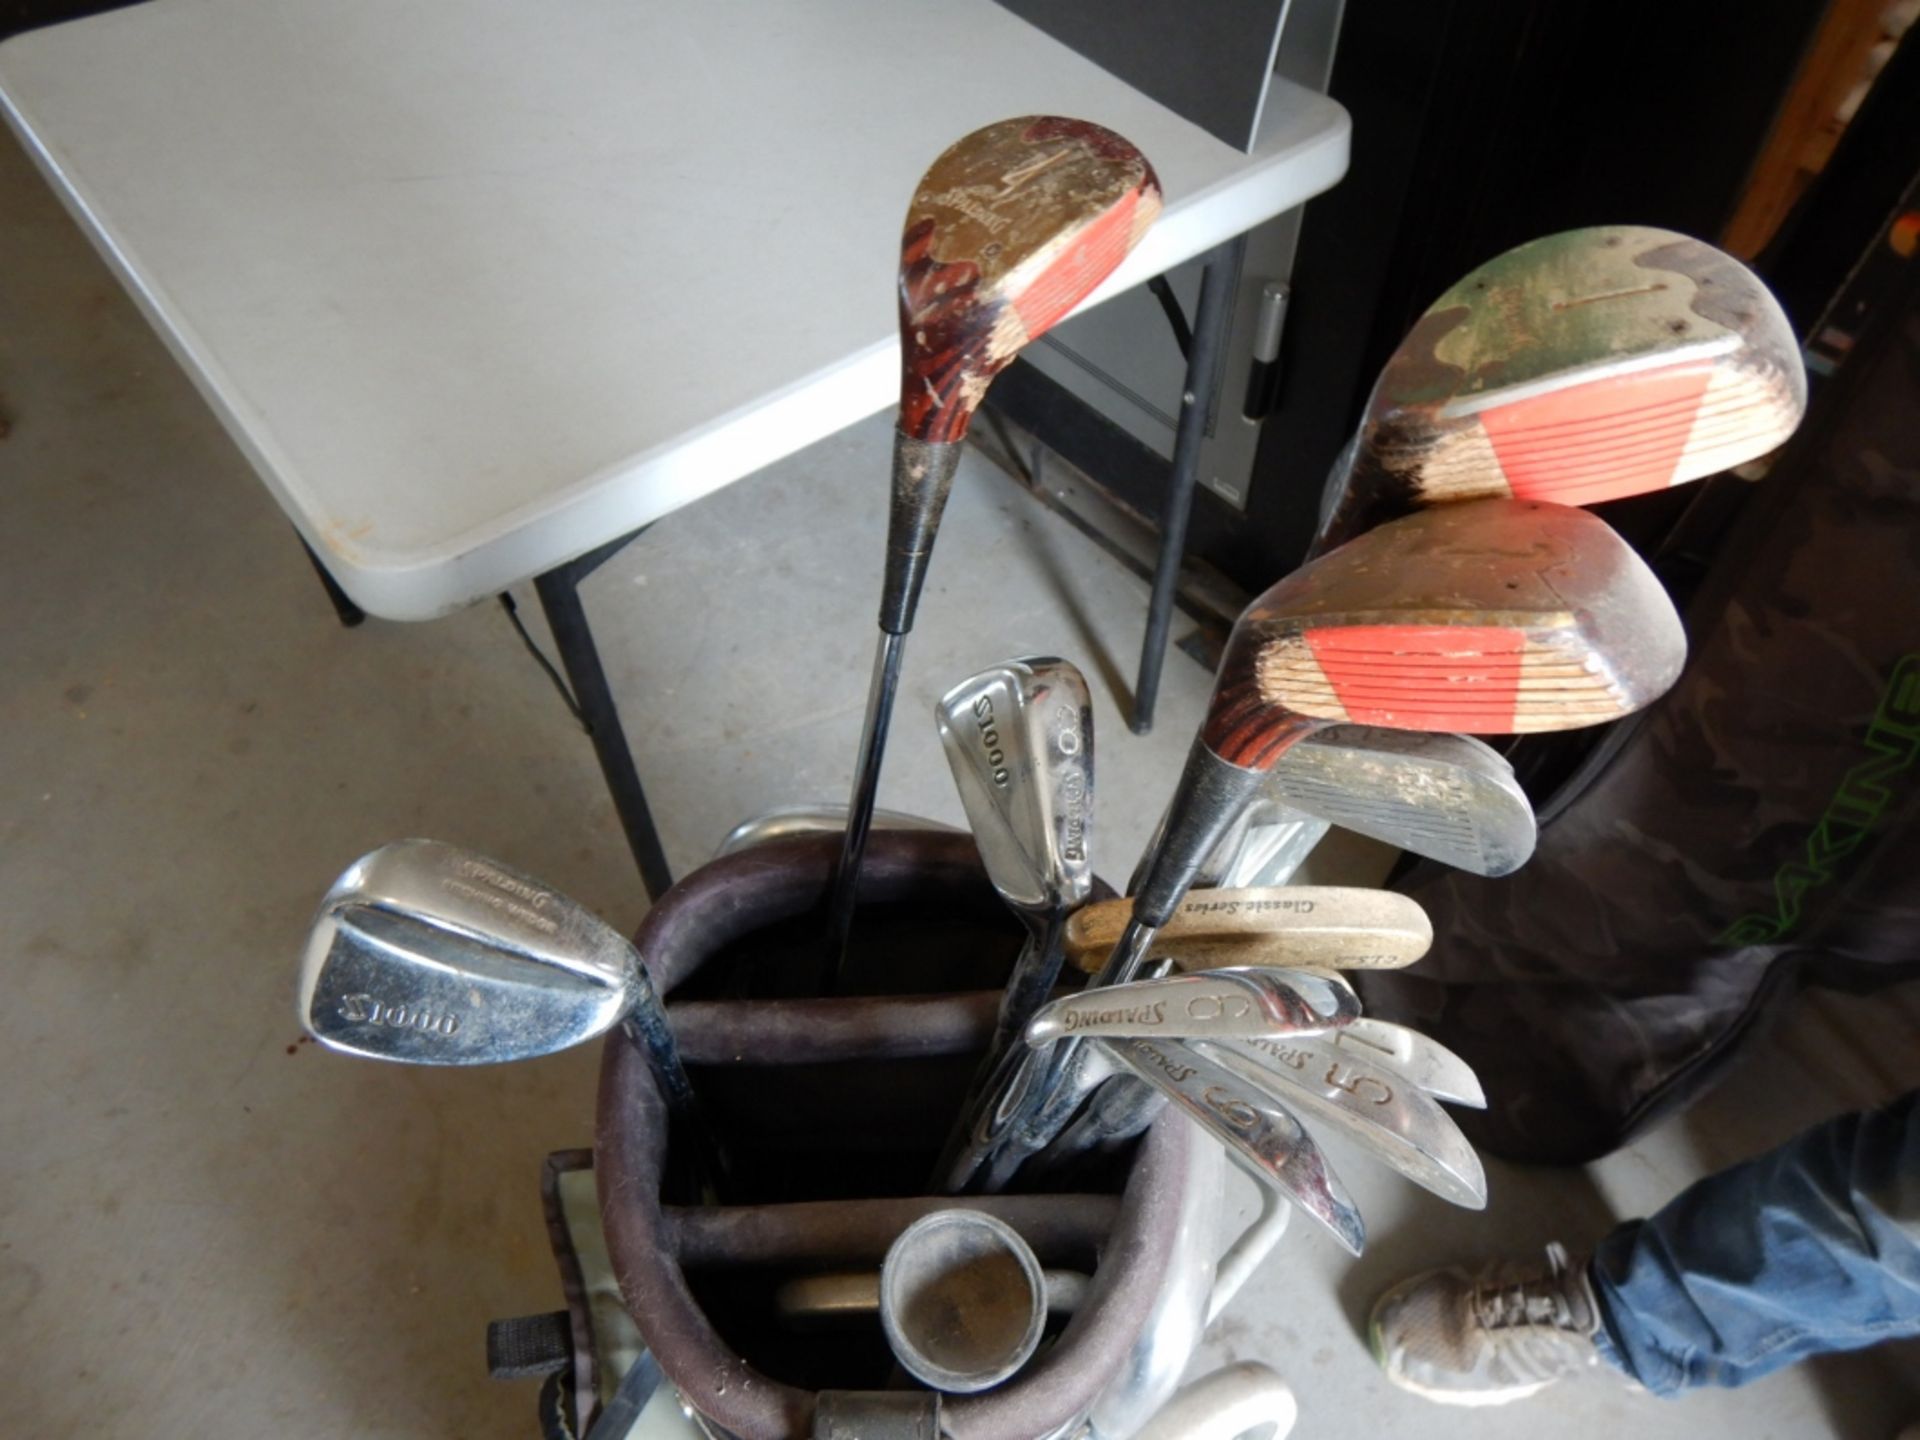 SET OF VINTAGE GOLF CLUBS W/ BAG AND RICSHAW - Image 3 of 3